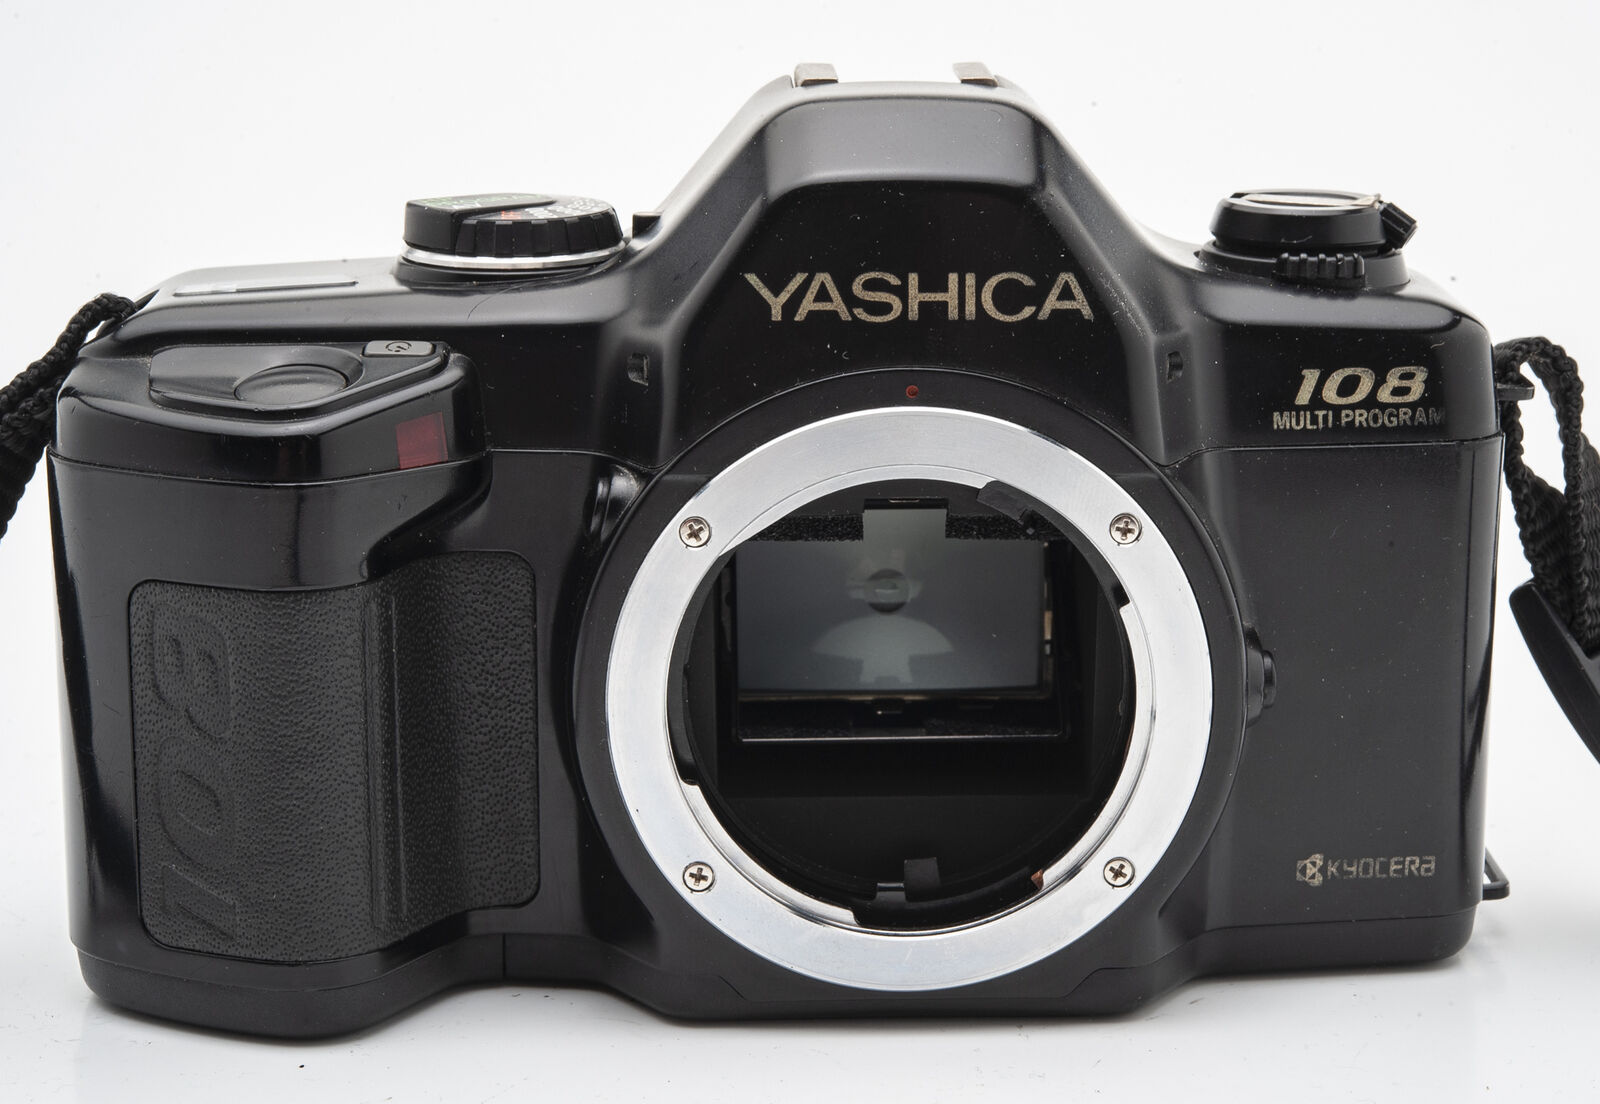 Yashica 108 Multi Program Body discount Chassis SLR Camera Easy-to-use Analogue